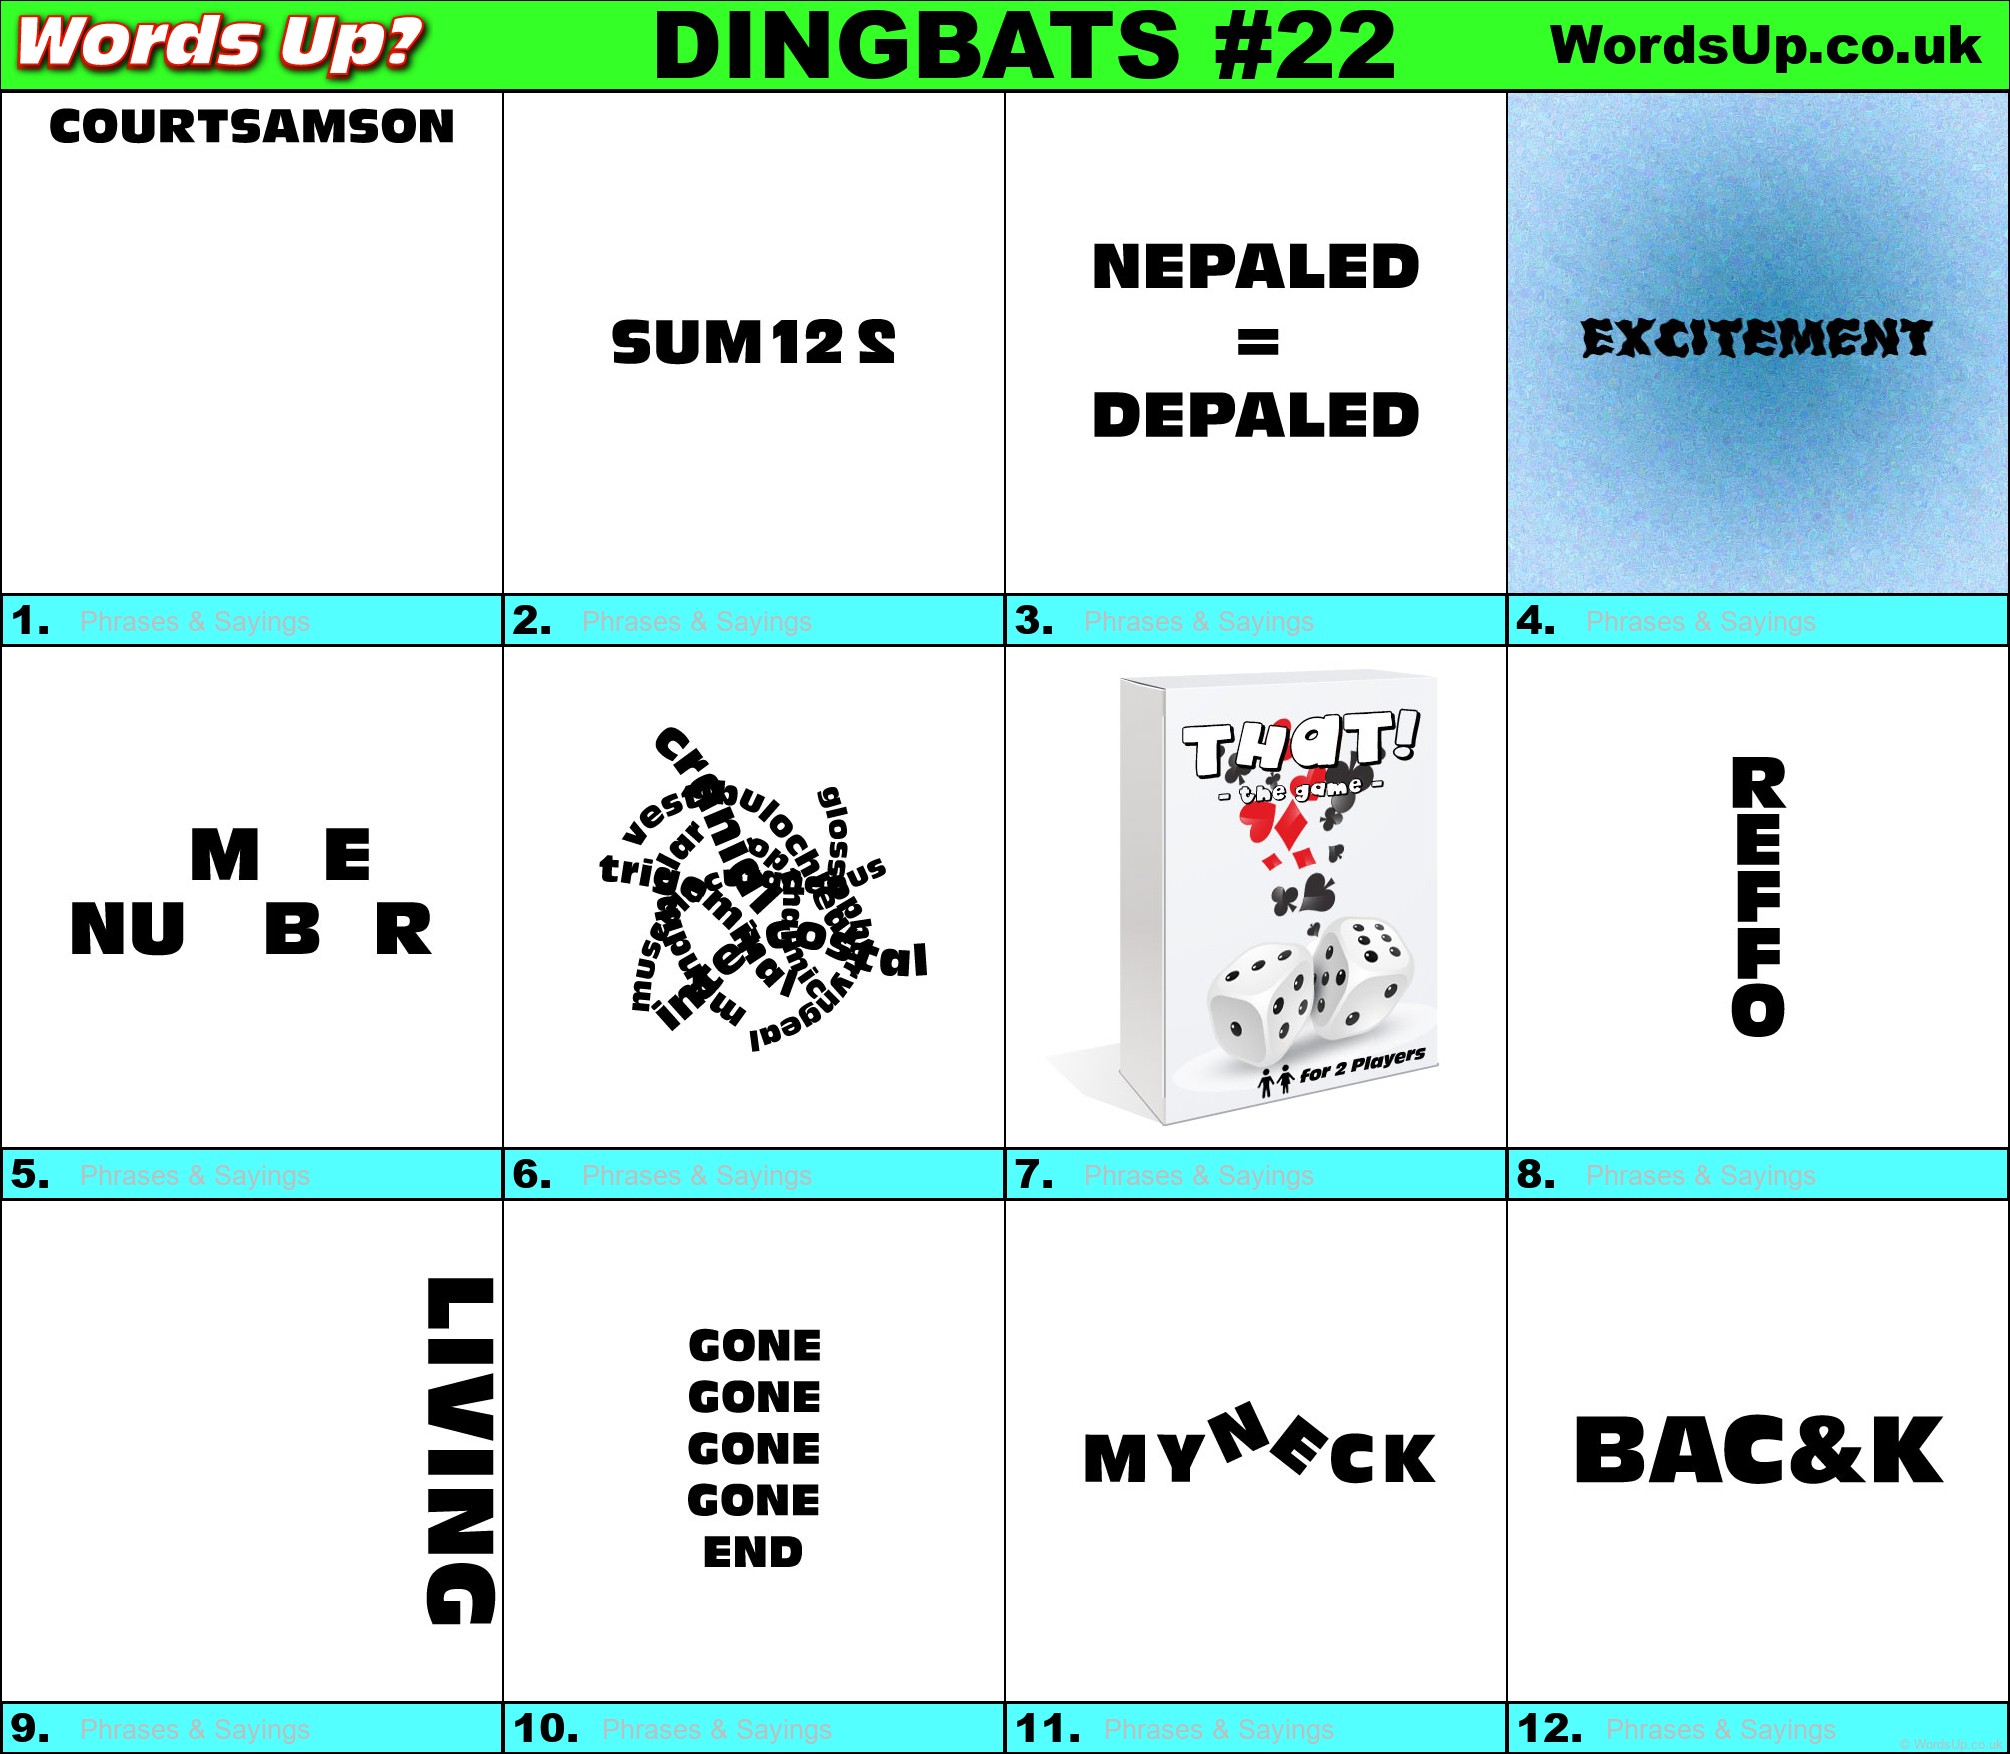 Dingbats Quiz 22 Find The Answers To Over 730 Dingbats Words Up Games